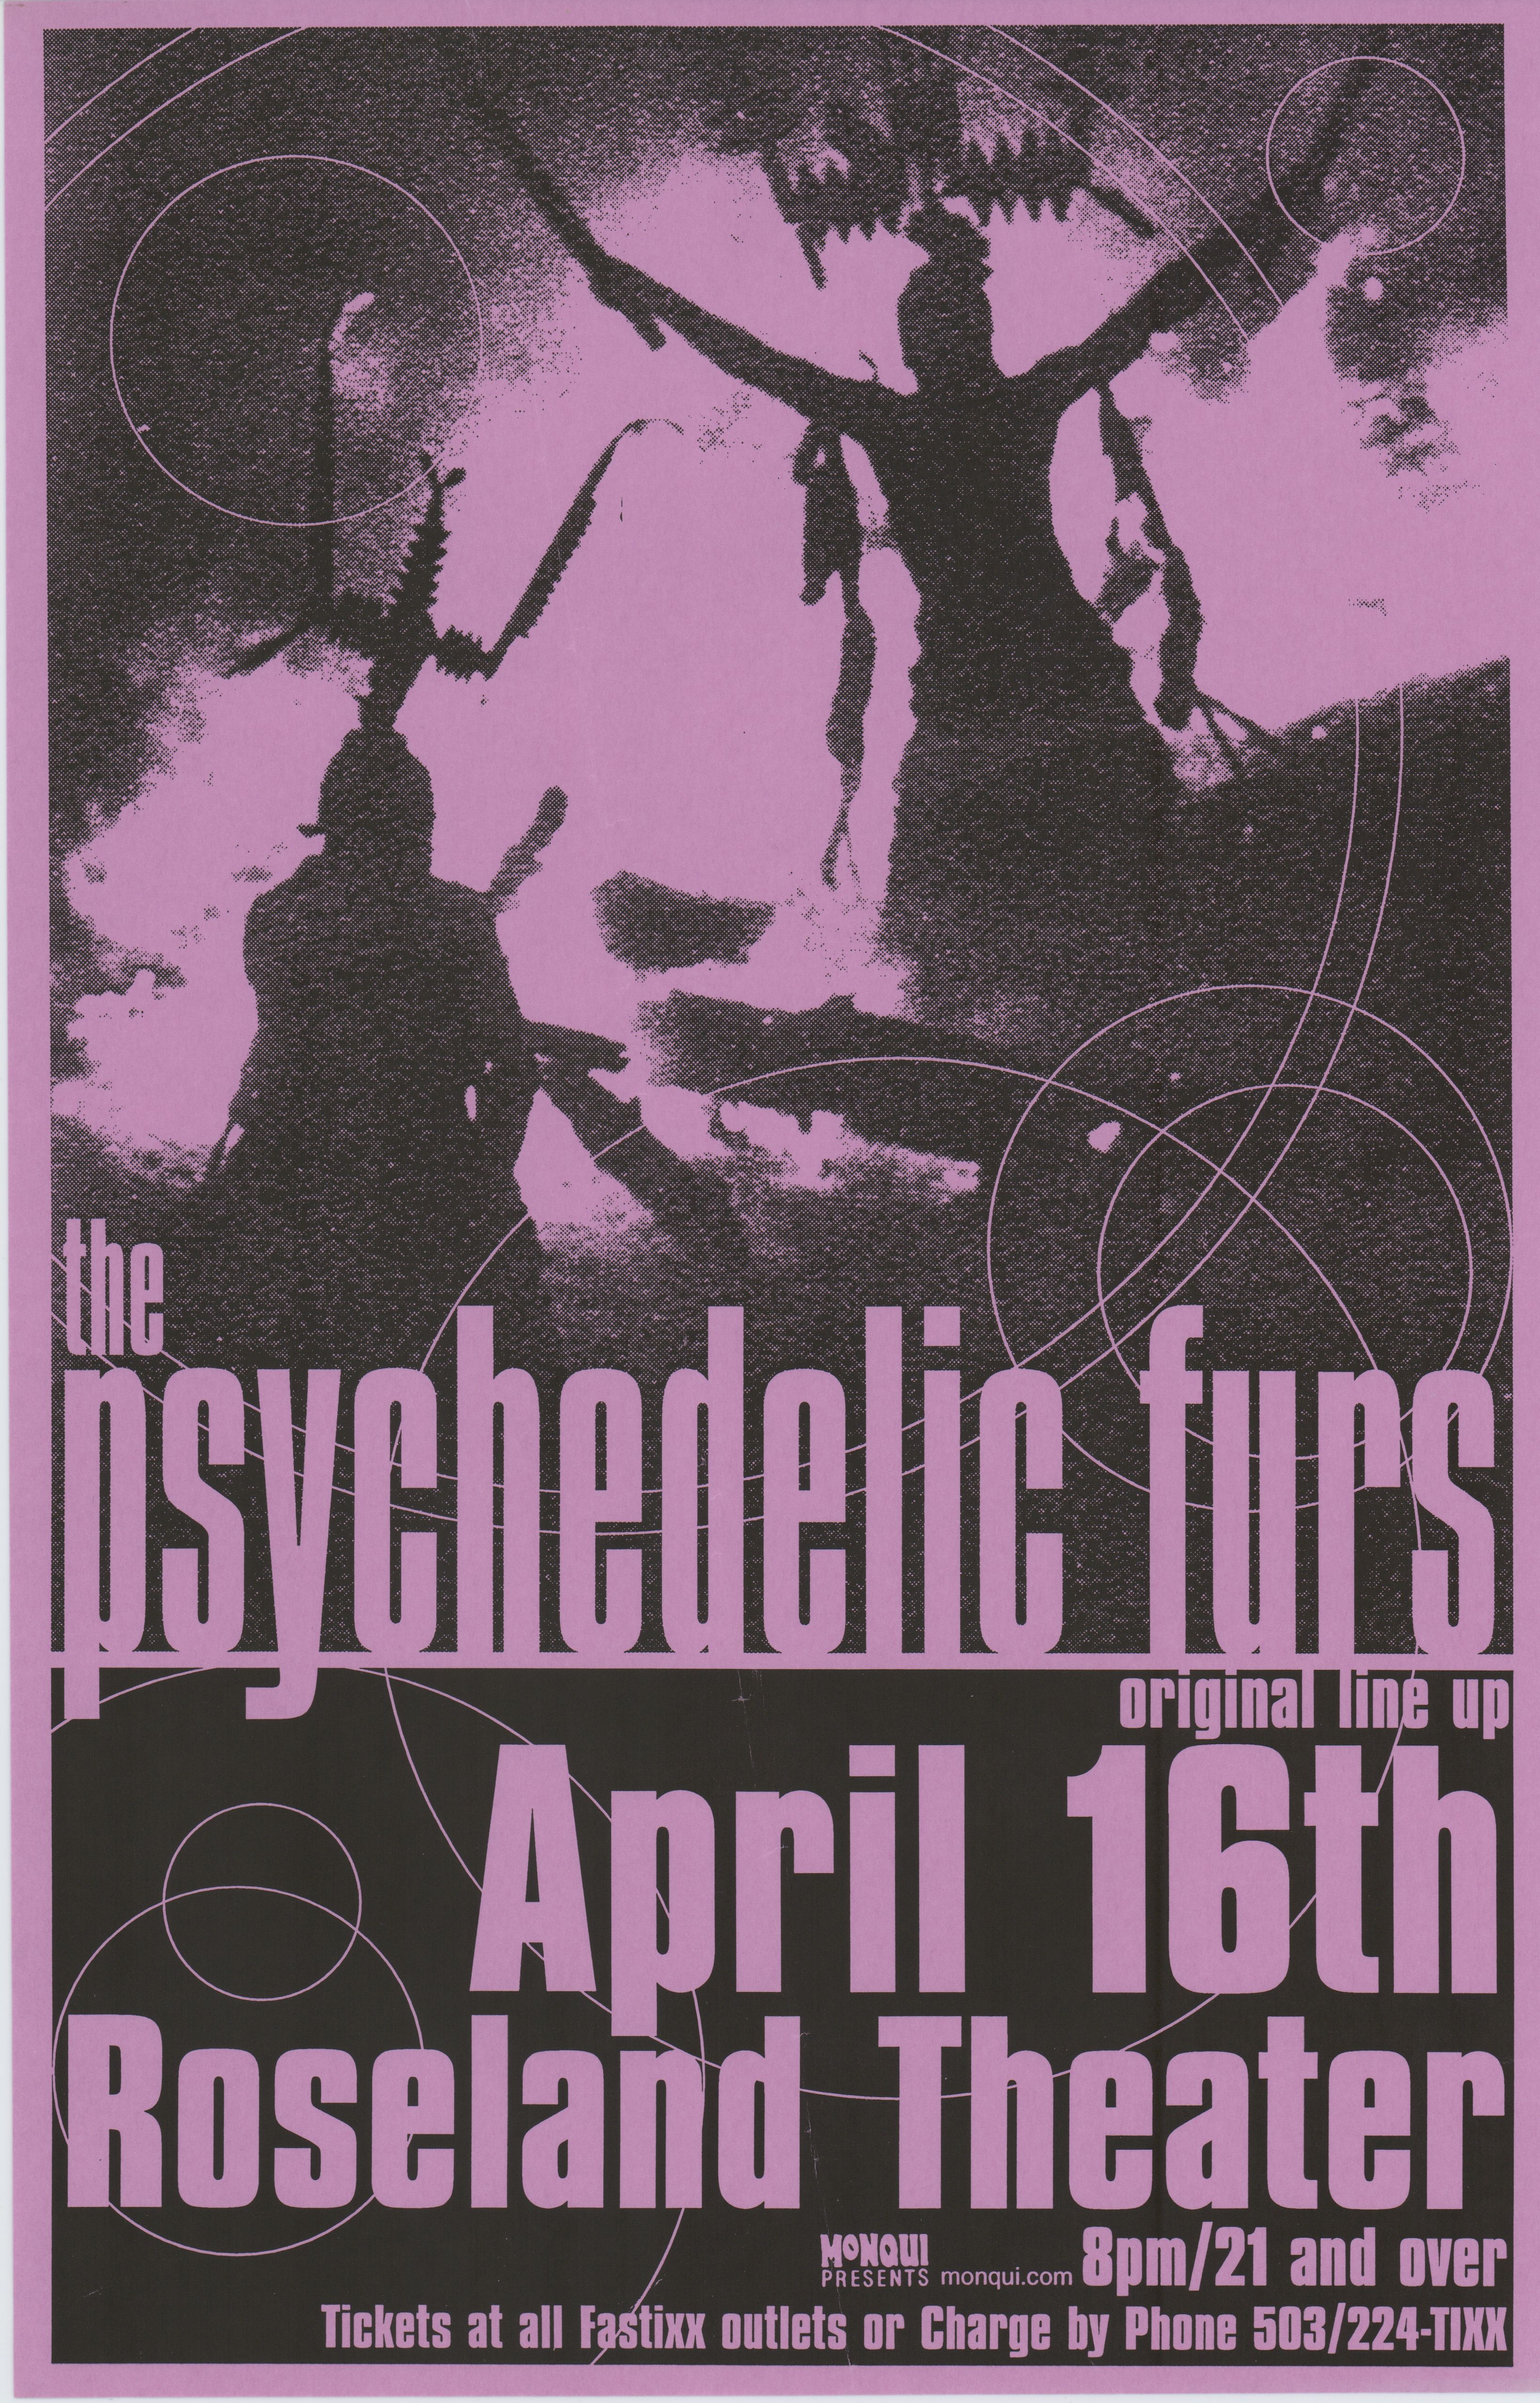 MXP-204.5 Psychedelic Furs 2001 Roseland Theater  Apr 16 Concert Poster